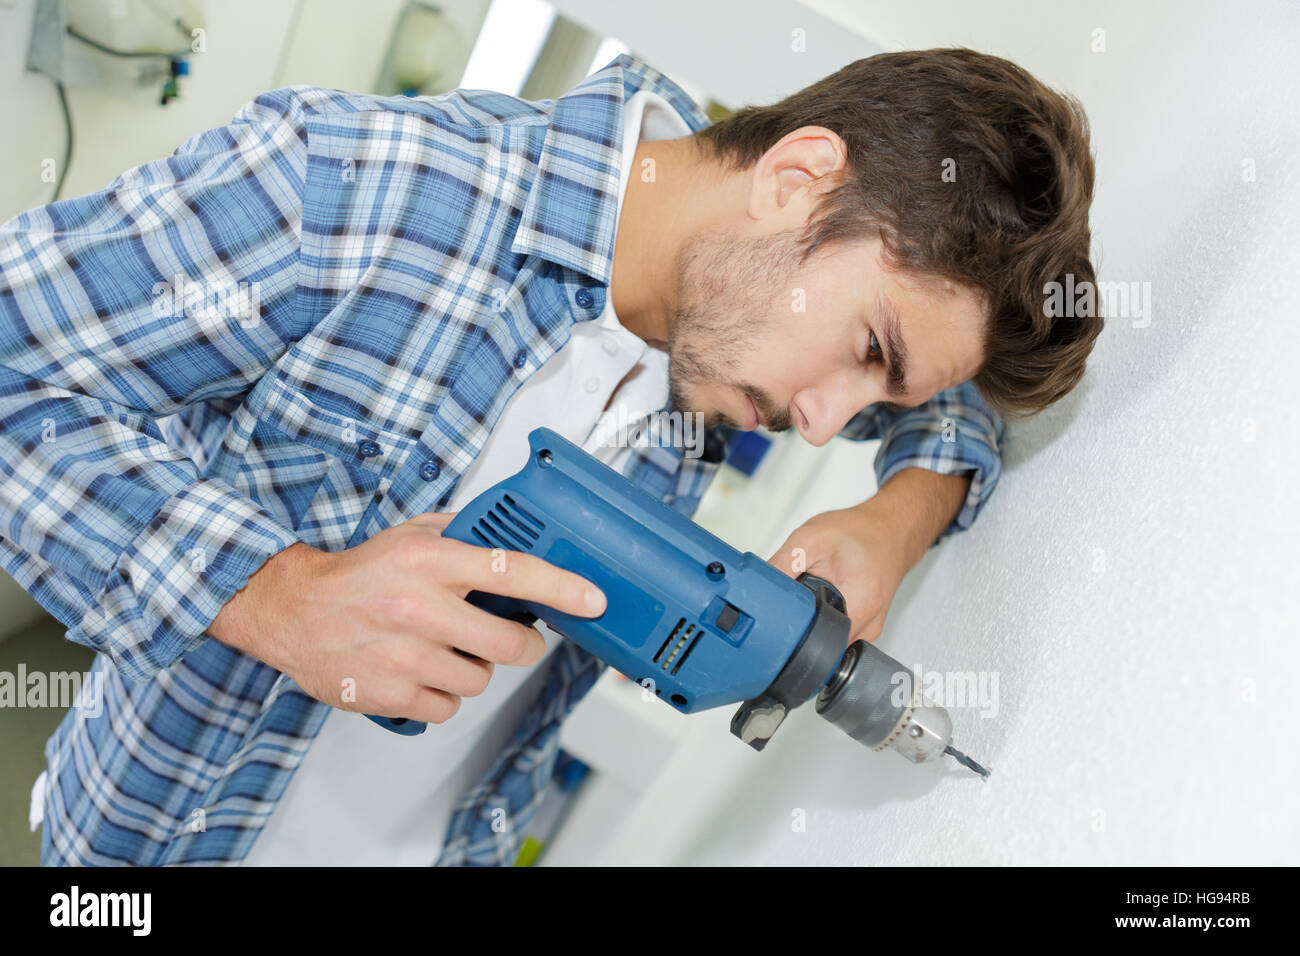 male builder drilling holes in wall at construction site Stock Photo